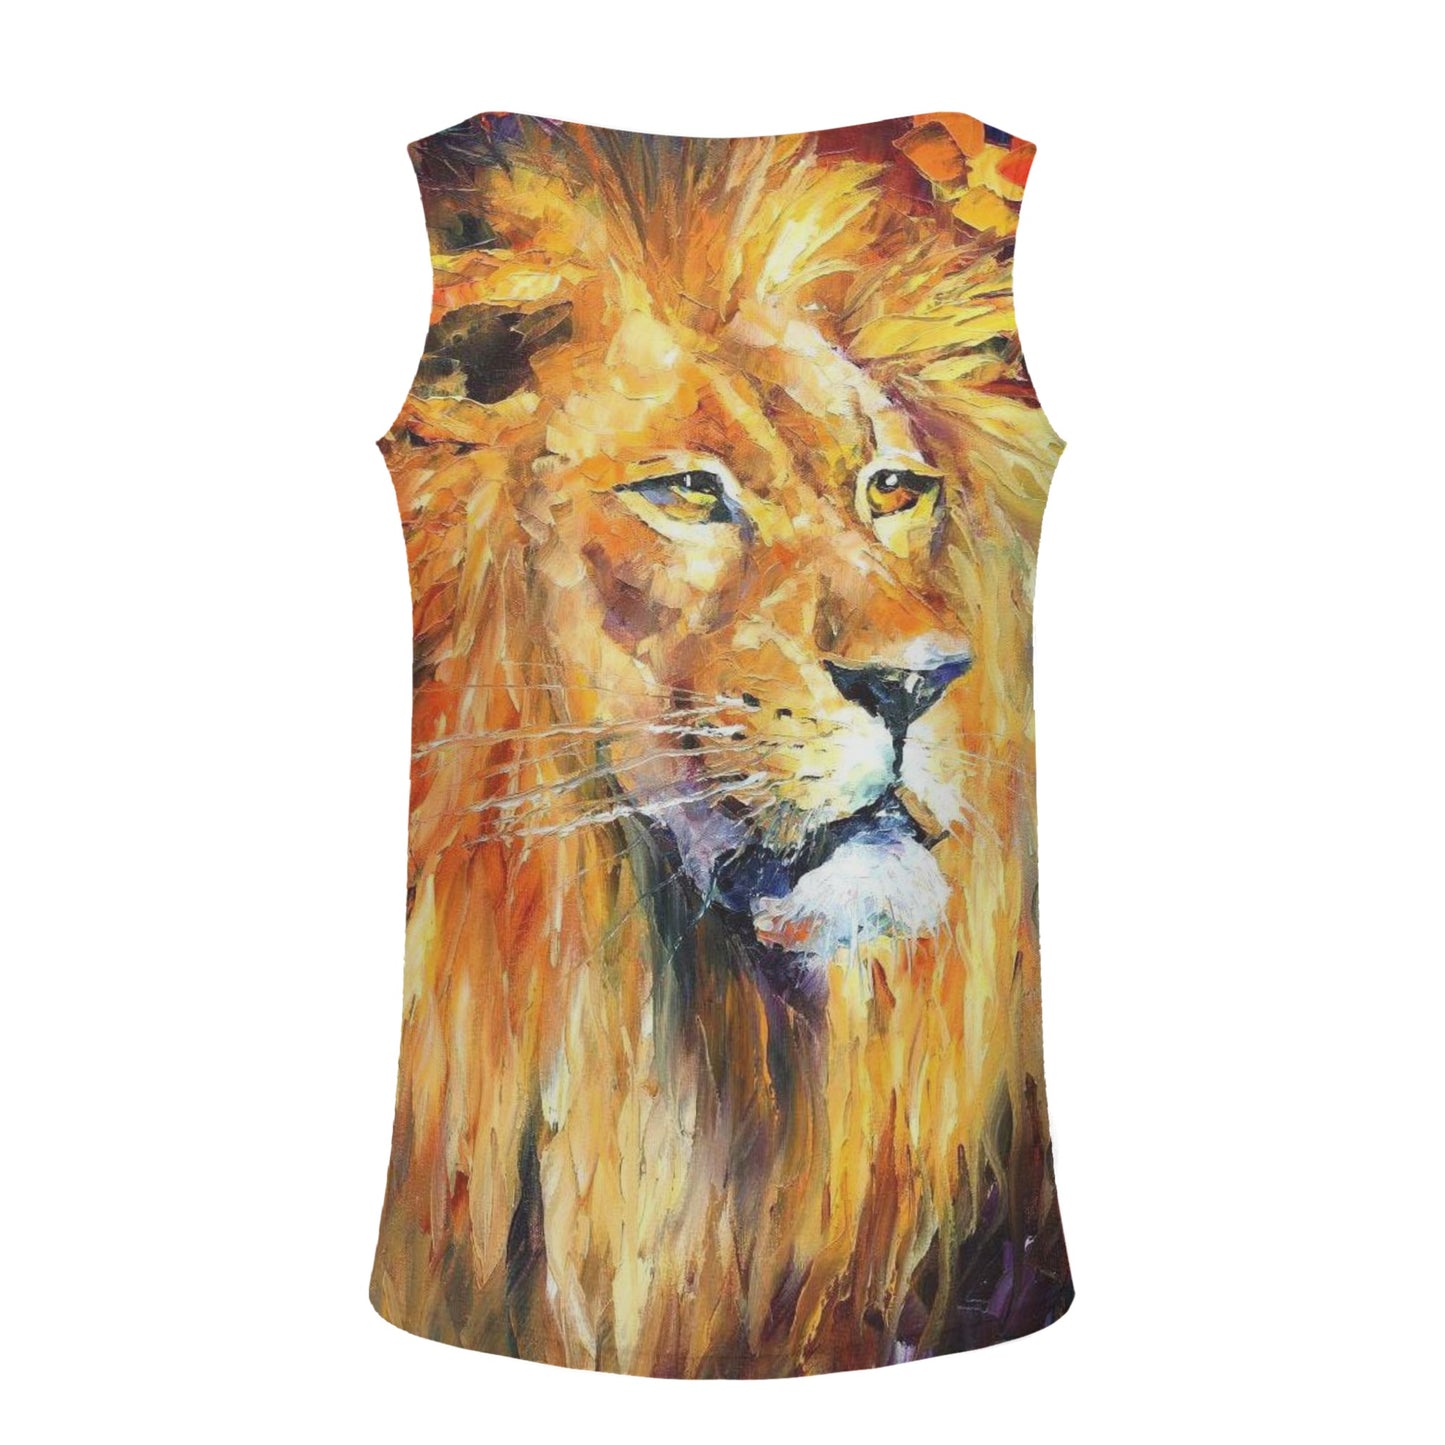 A LION Men's All Over Print Tank